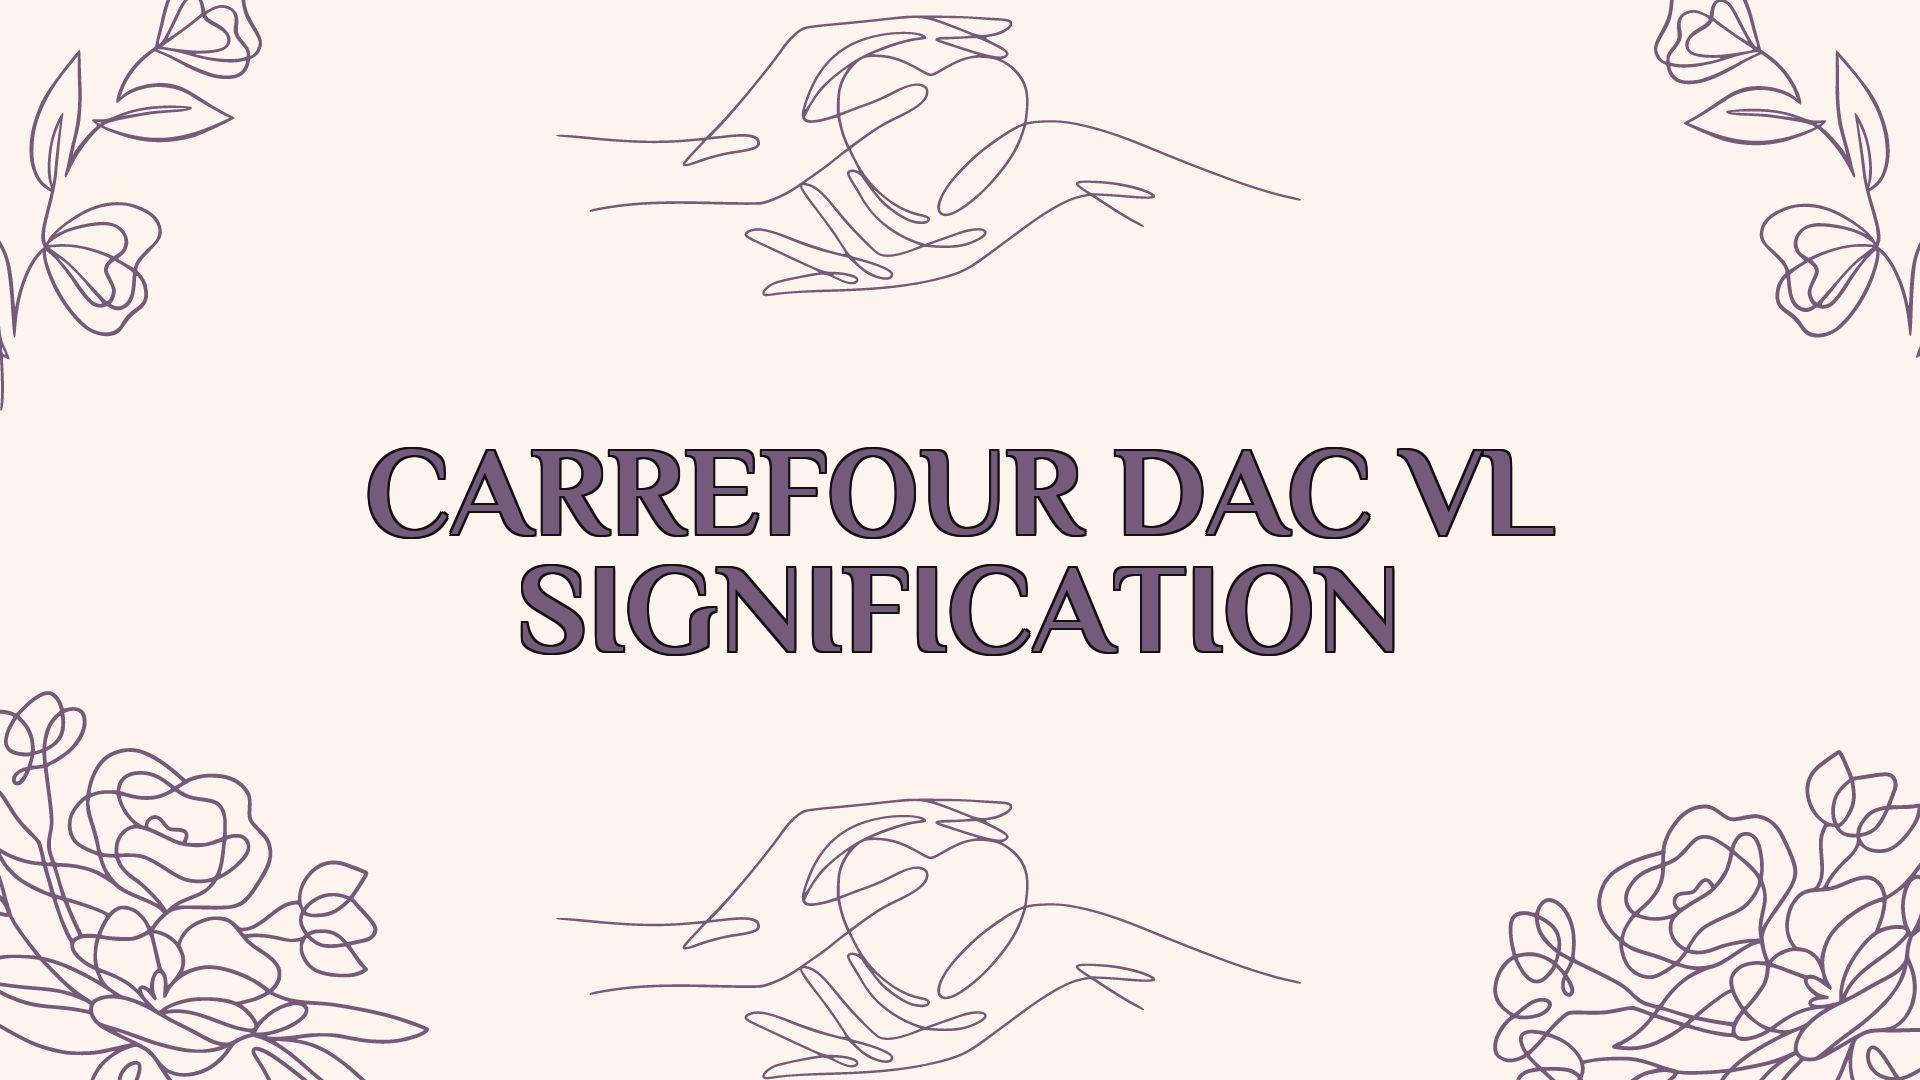 carrefour dac vl signification